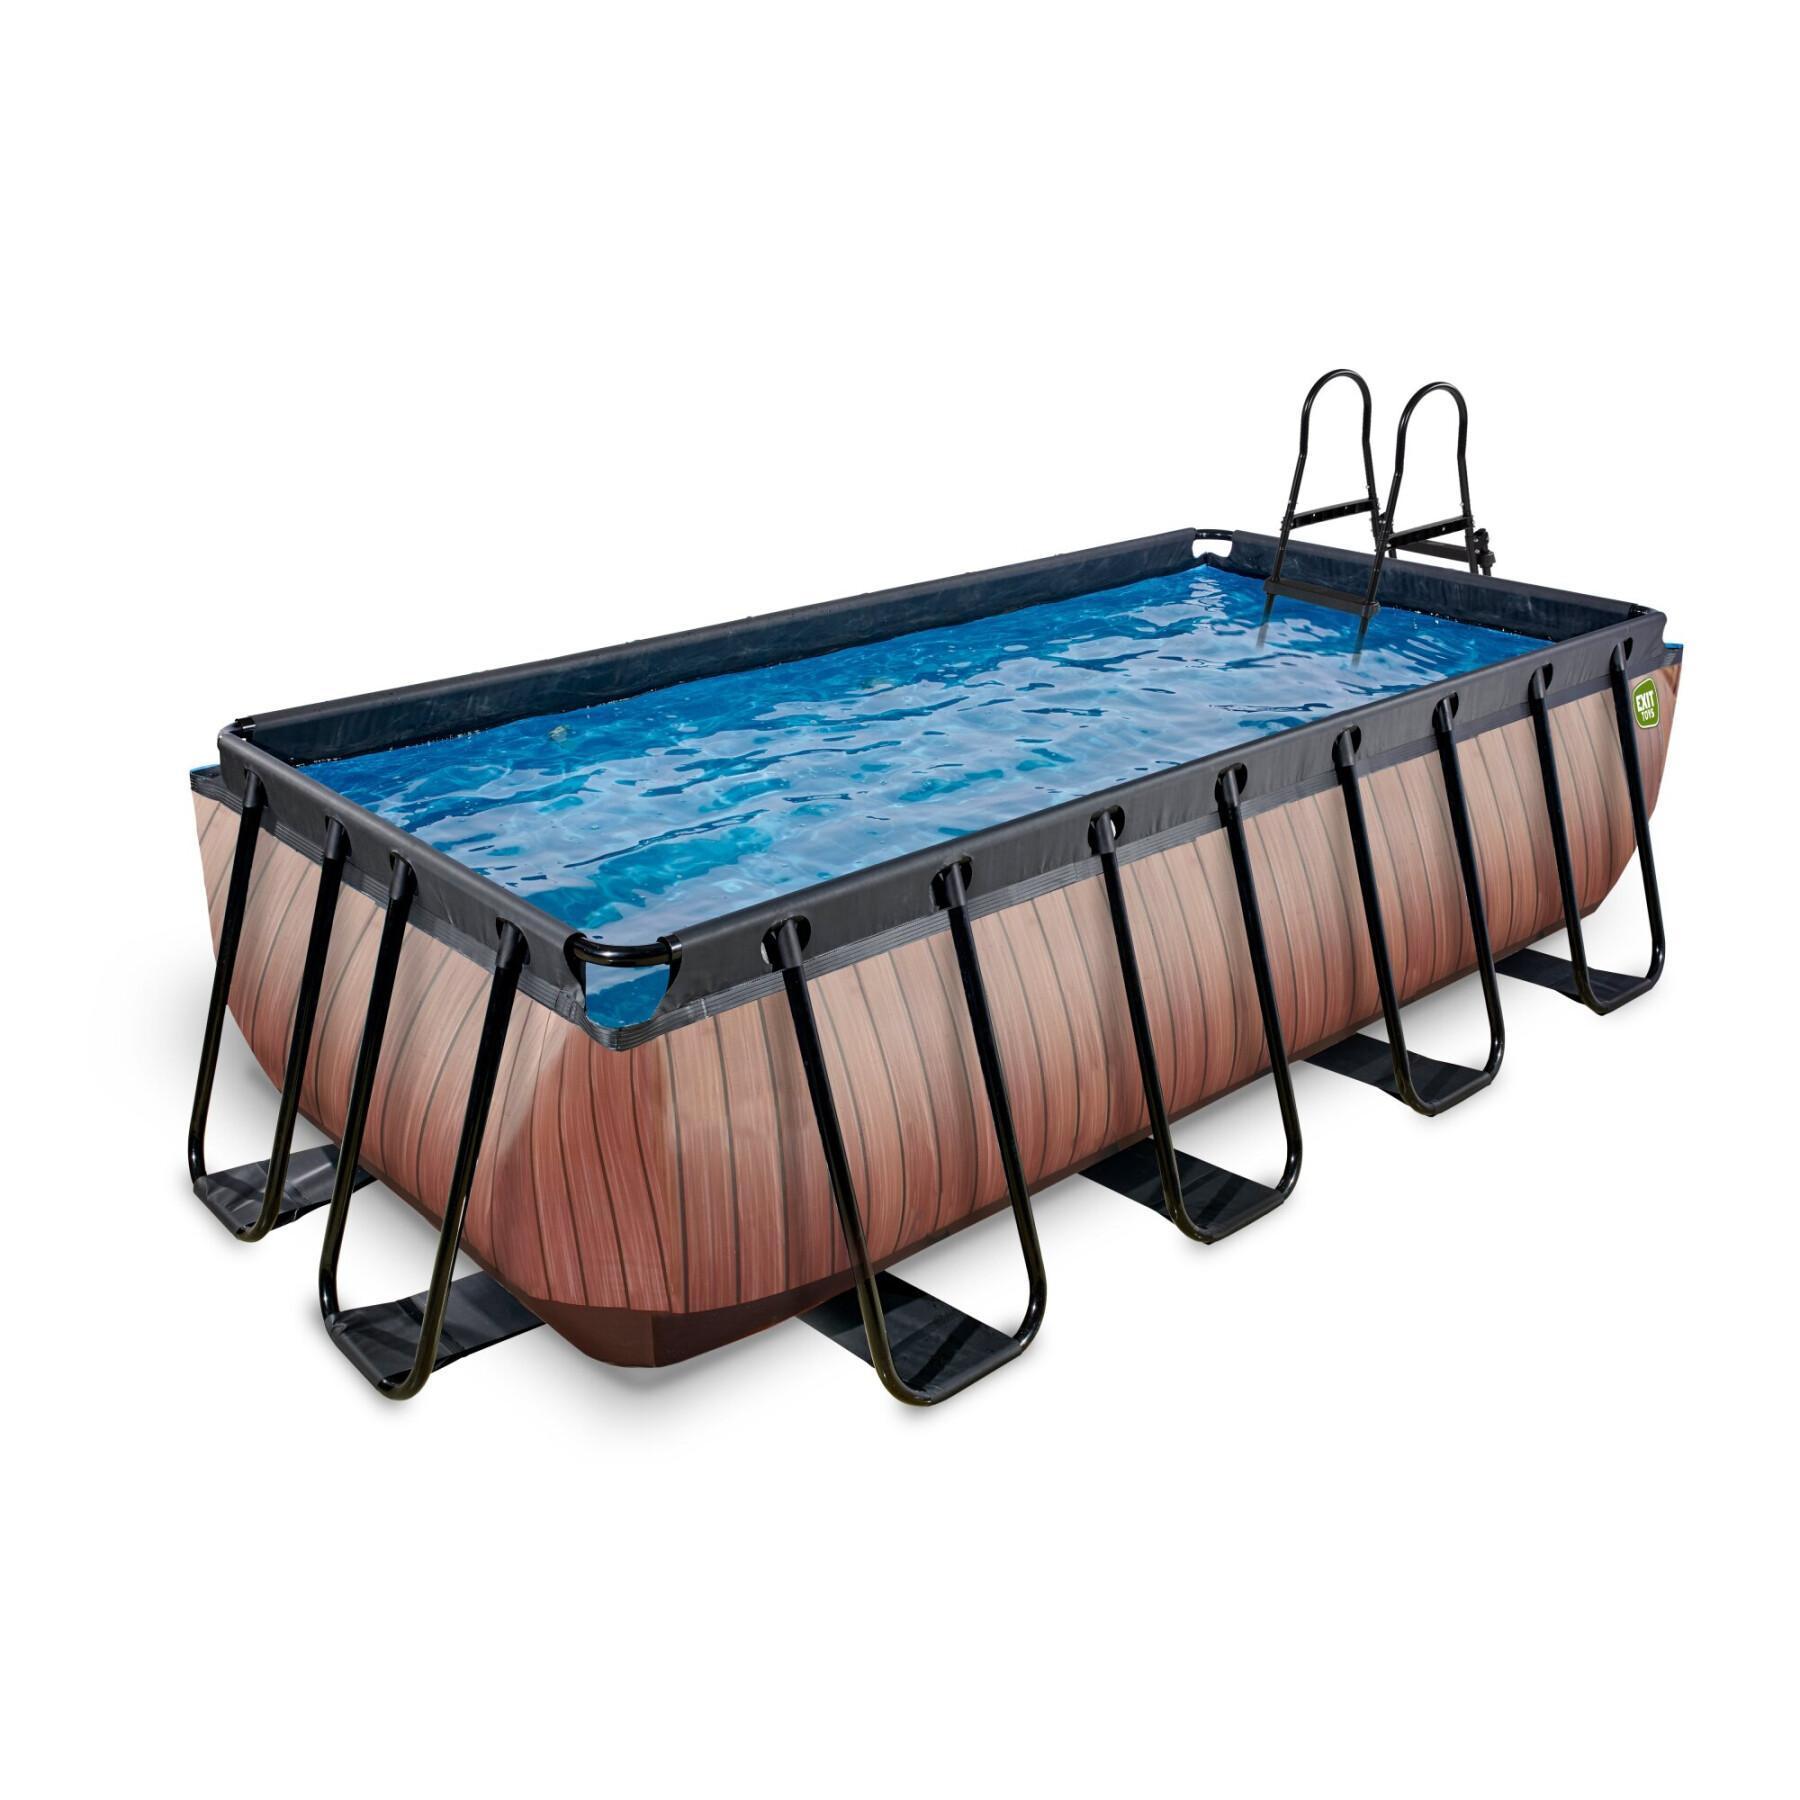 Swimming pool with children's filter pump Exit Toys Wood 400 x 200 x 100 cm